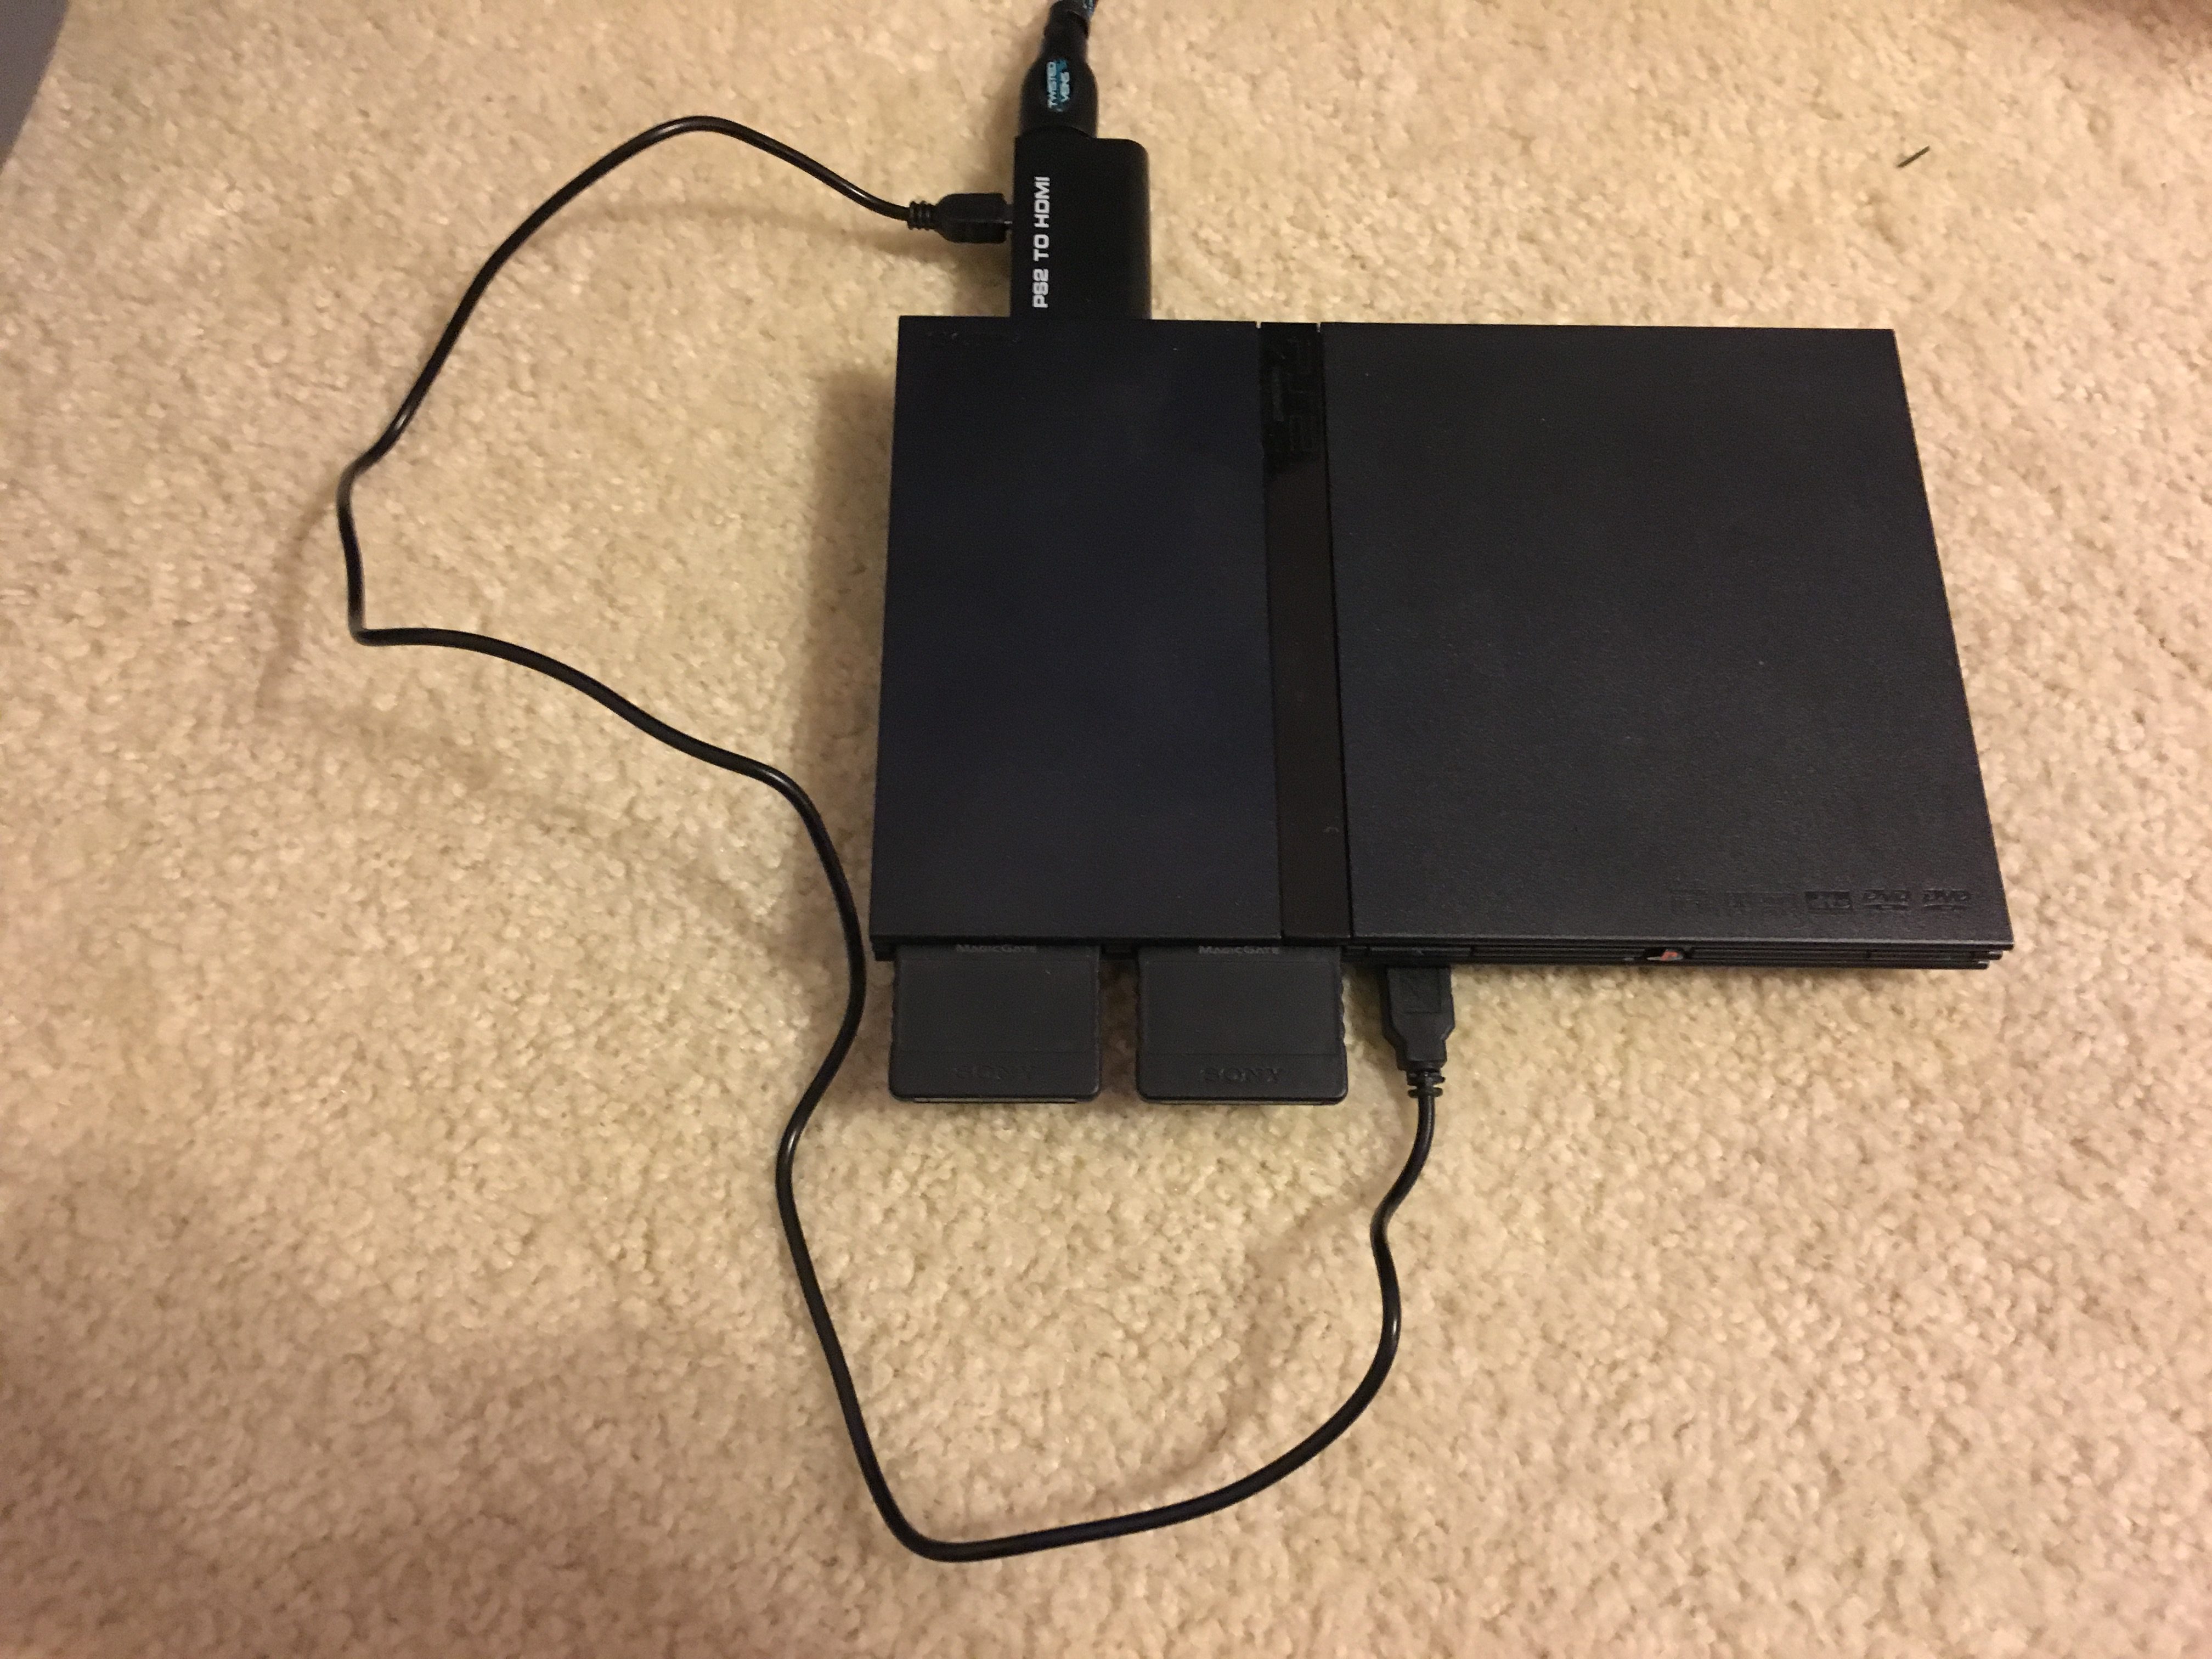 hooking up ps2 to new tv